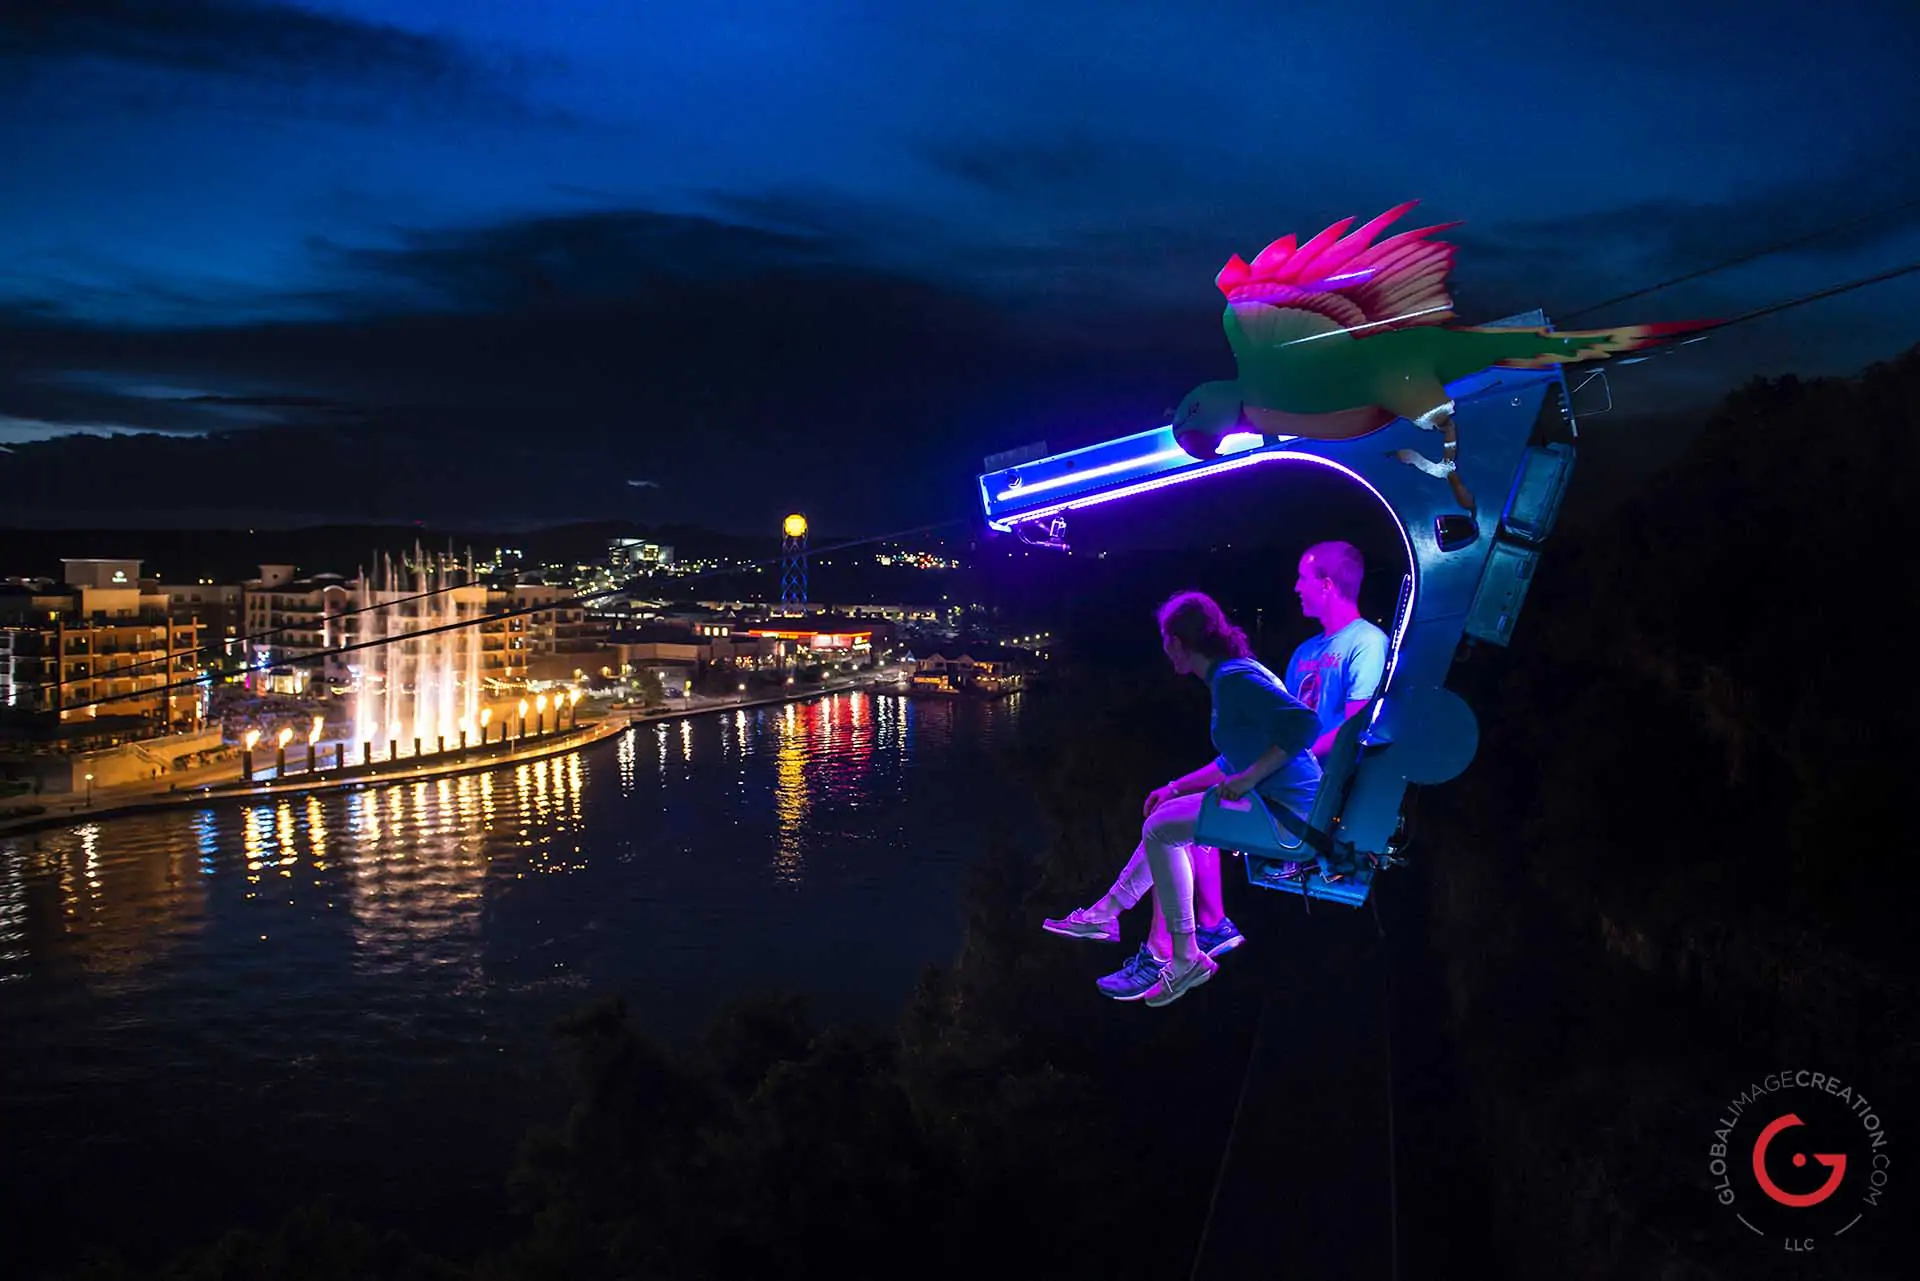 Couple rides the zip line at the Branson Landing at night while the fountain show plays in the background - Advertising photographers in Branson Missouri, Branson Missouri photography